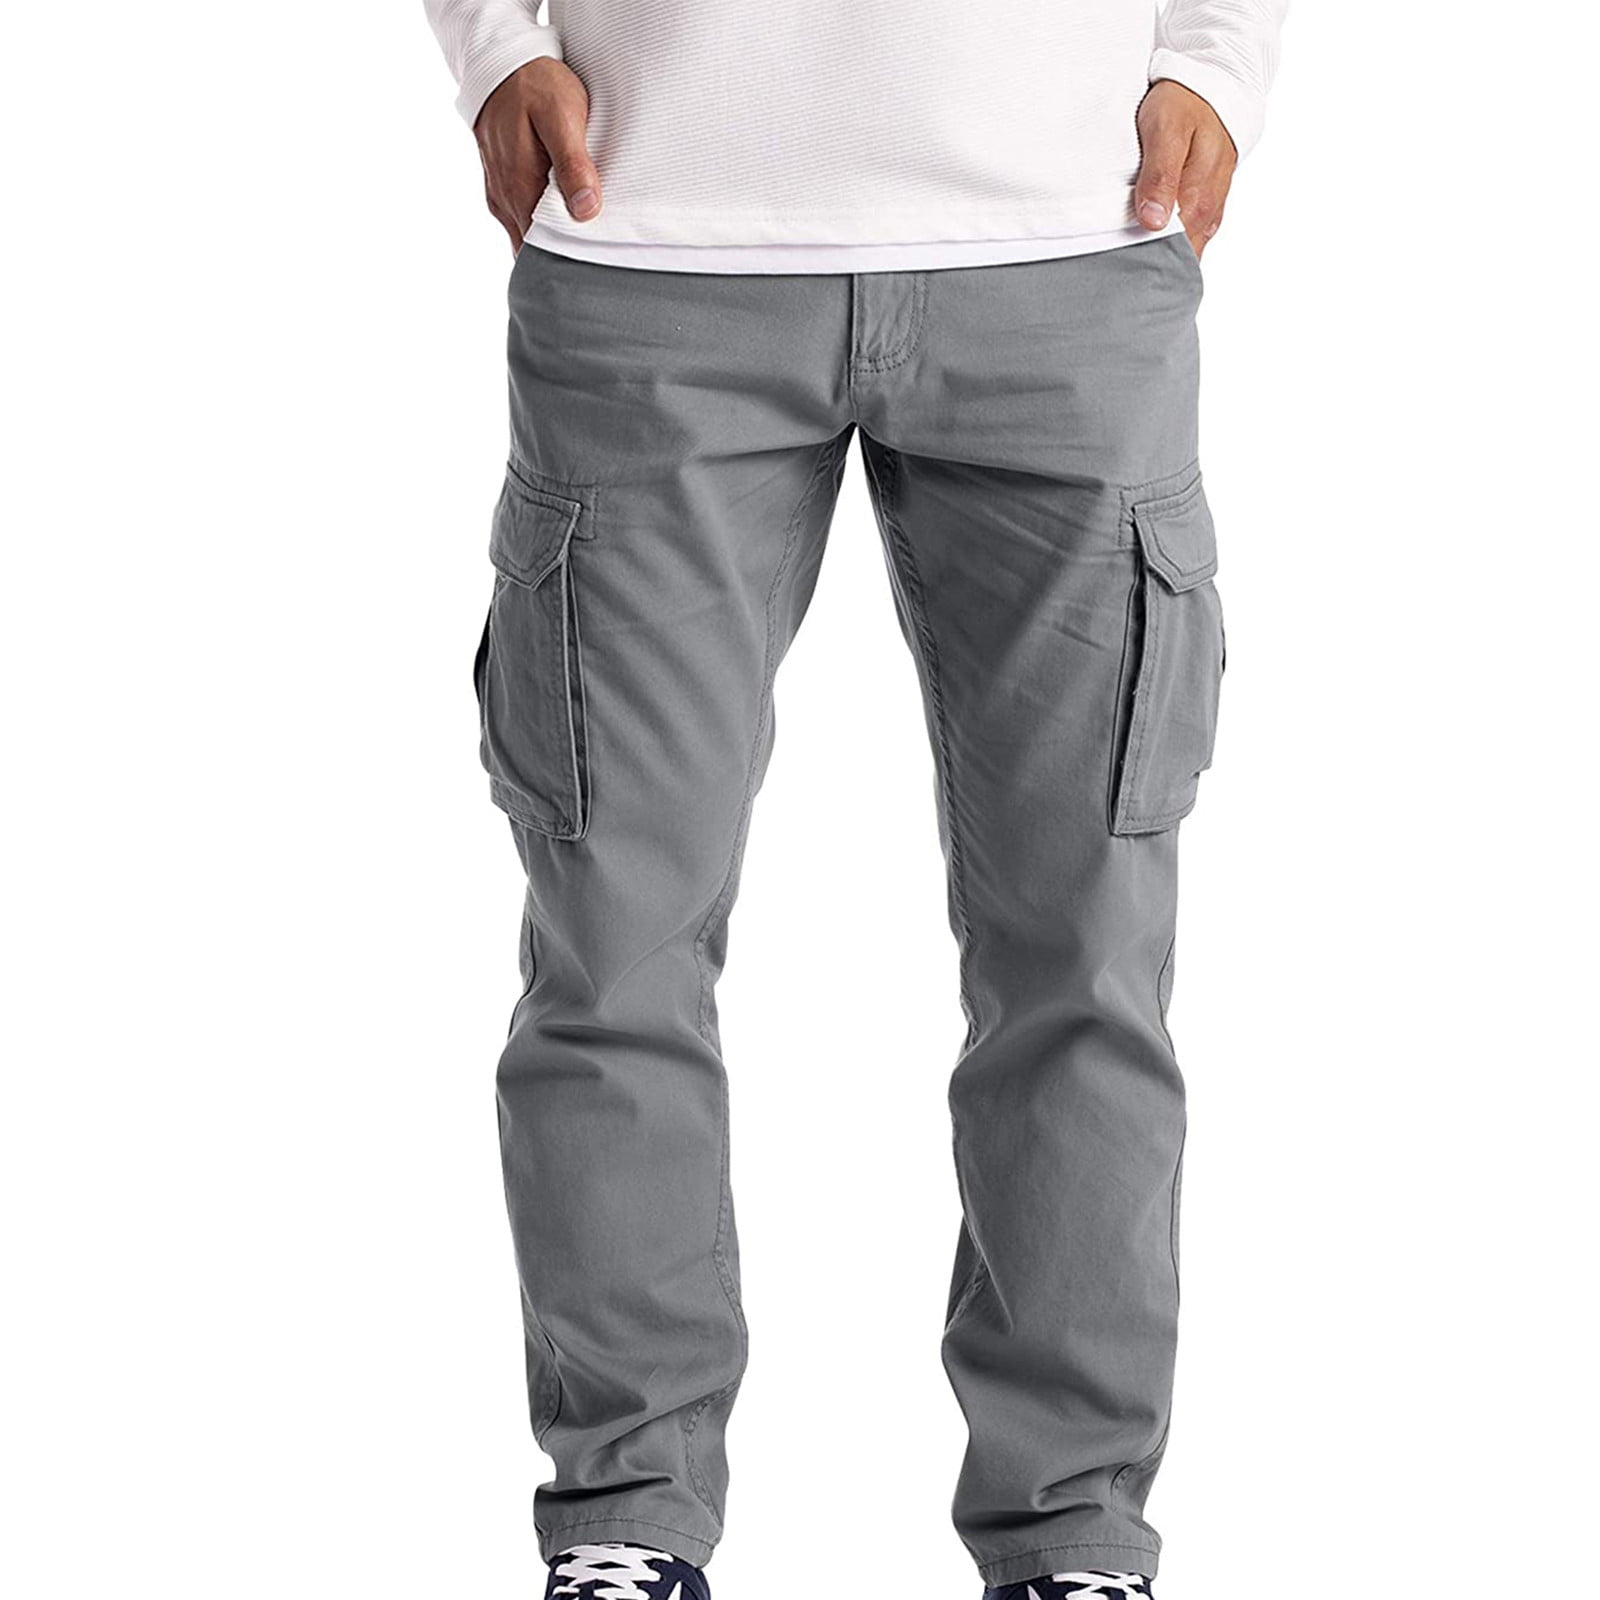 VEKDONE Under 10.00 Dollar Items for Men Pants for Warehouse Deals Today My  Recent Orders 